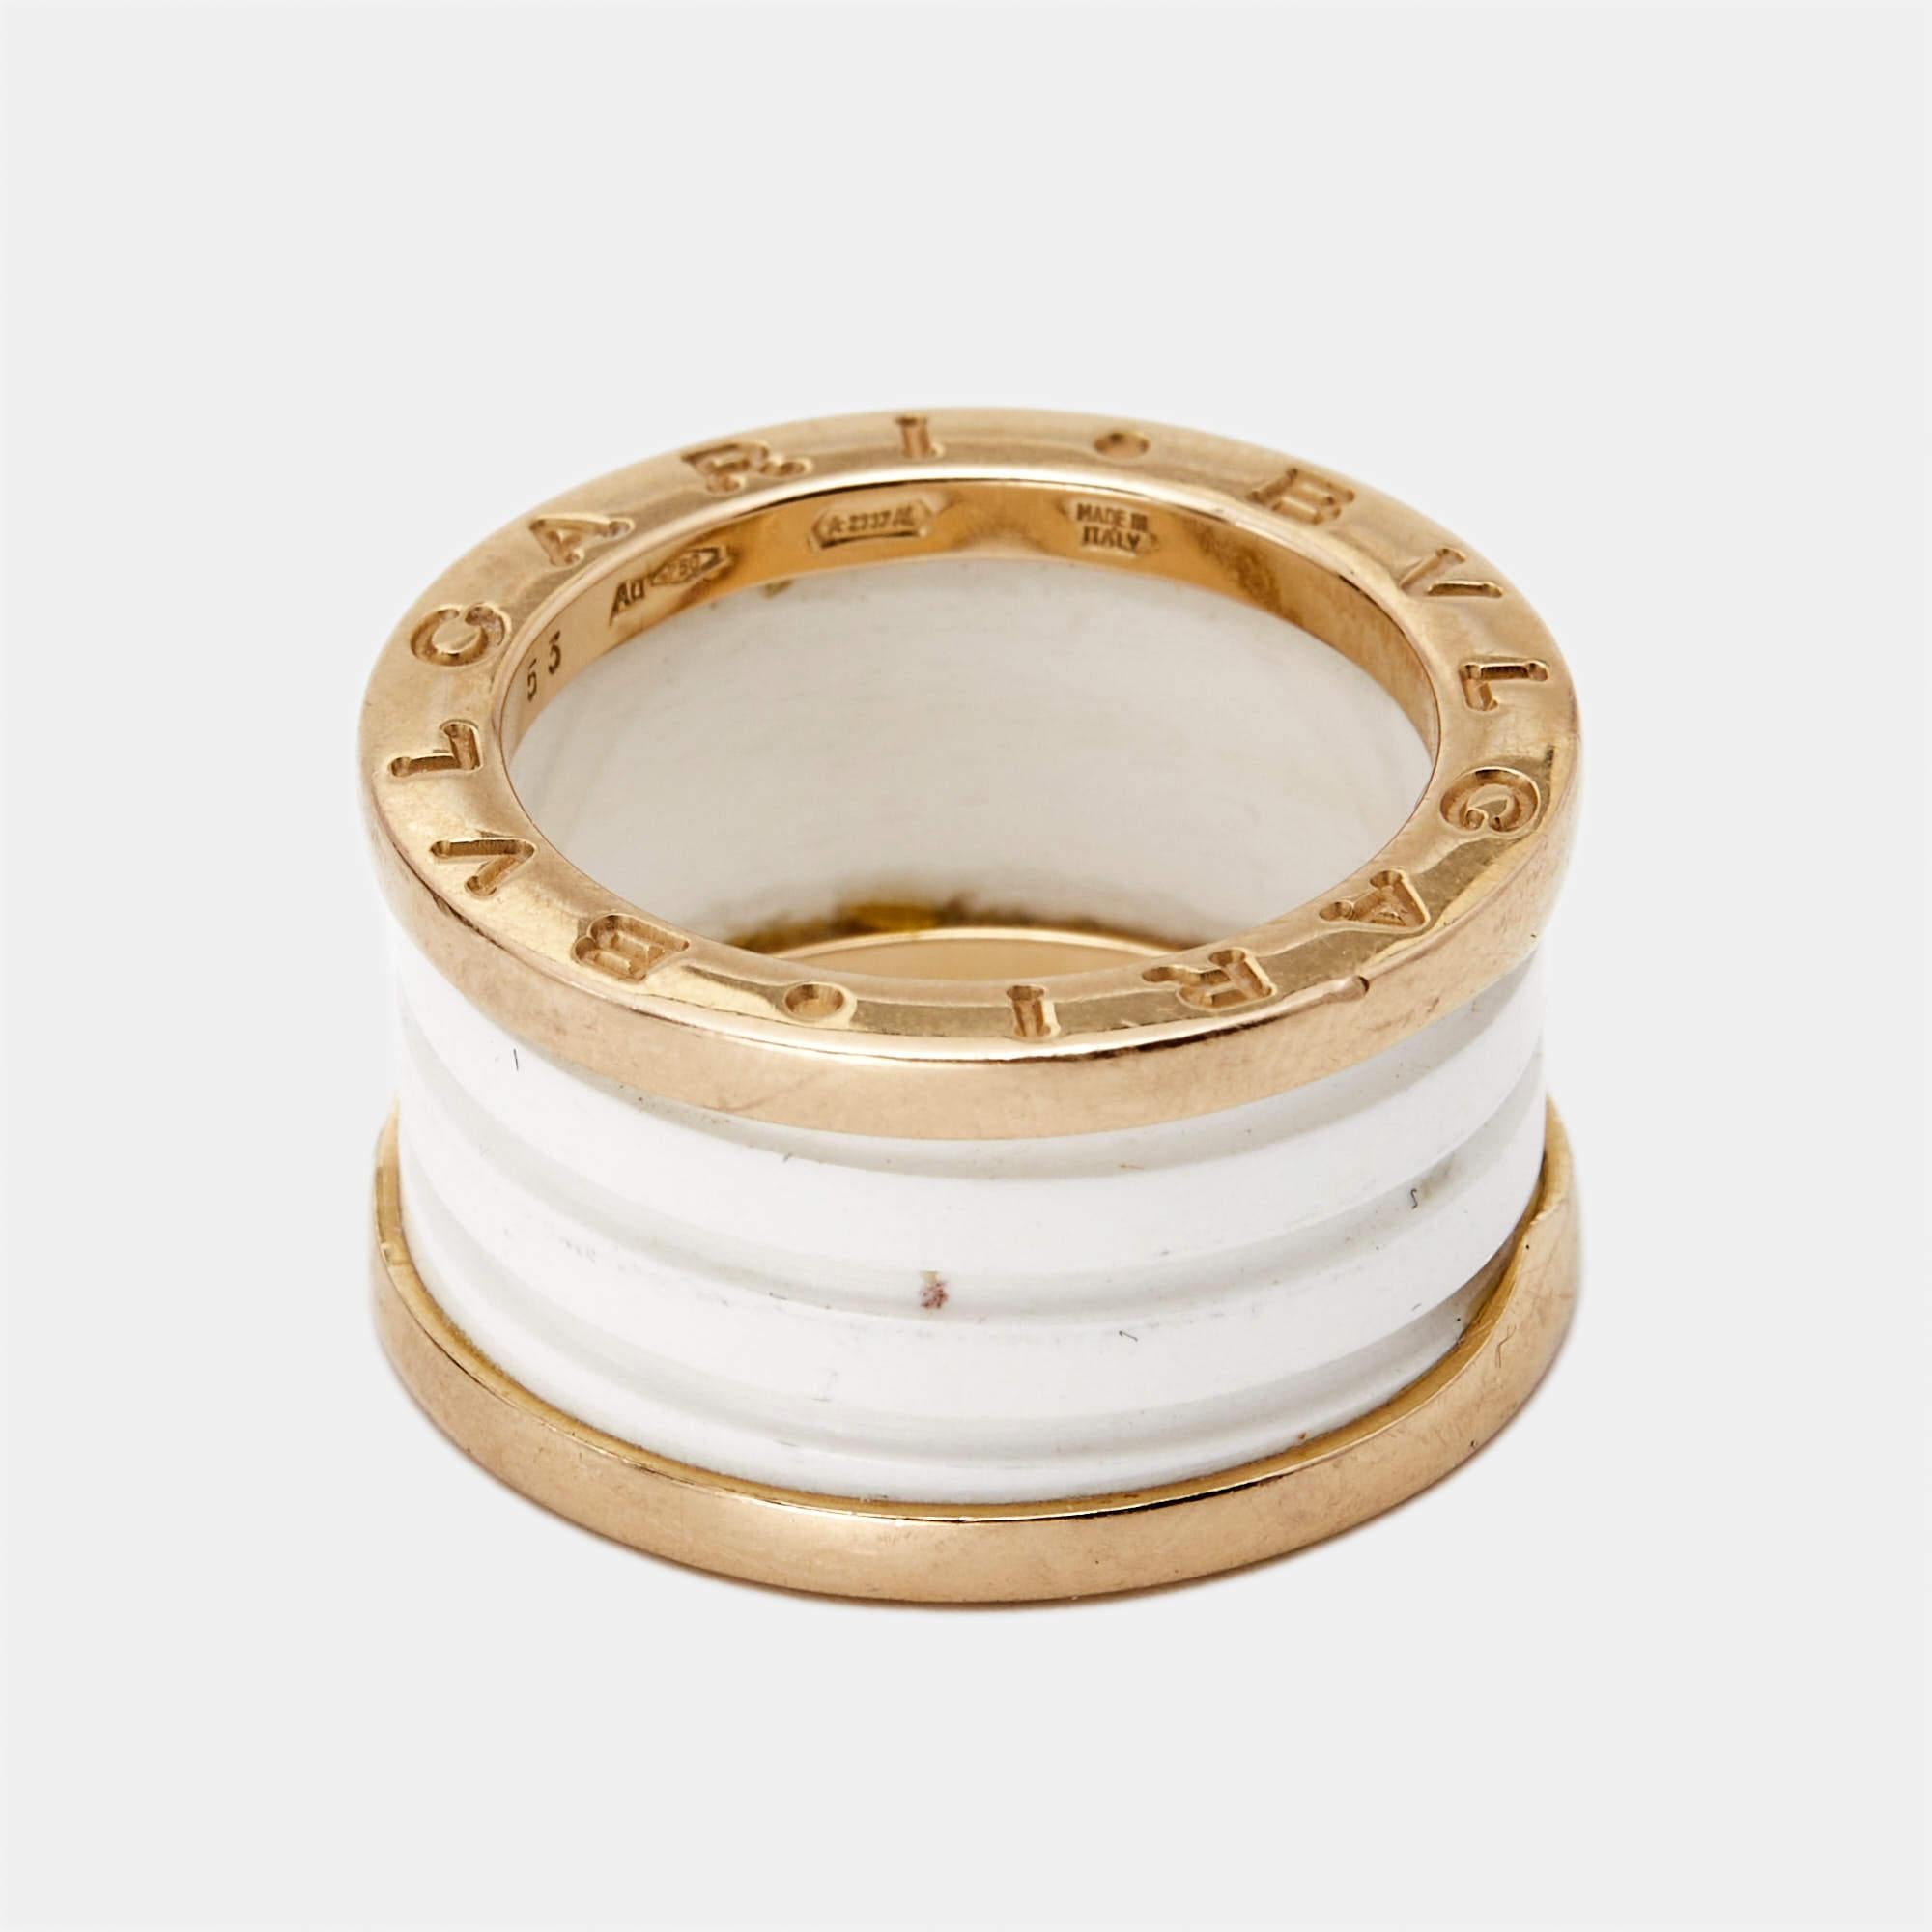 Unique and modern, this charming B.Zero1 band ring is from one of Bvlgari's iconic collections. Beautifully crafted from 18k rose gold and white ceramic, the ring has a stacked-band style. Inspired by the Colosseum, this ring merges exceptional